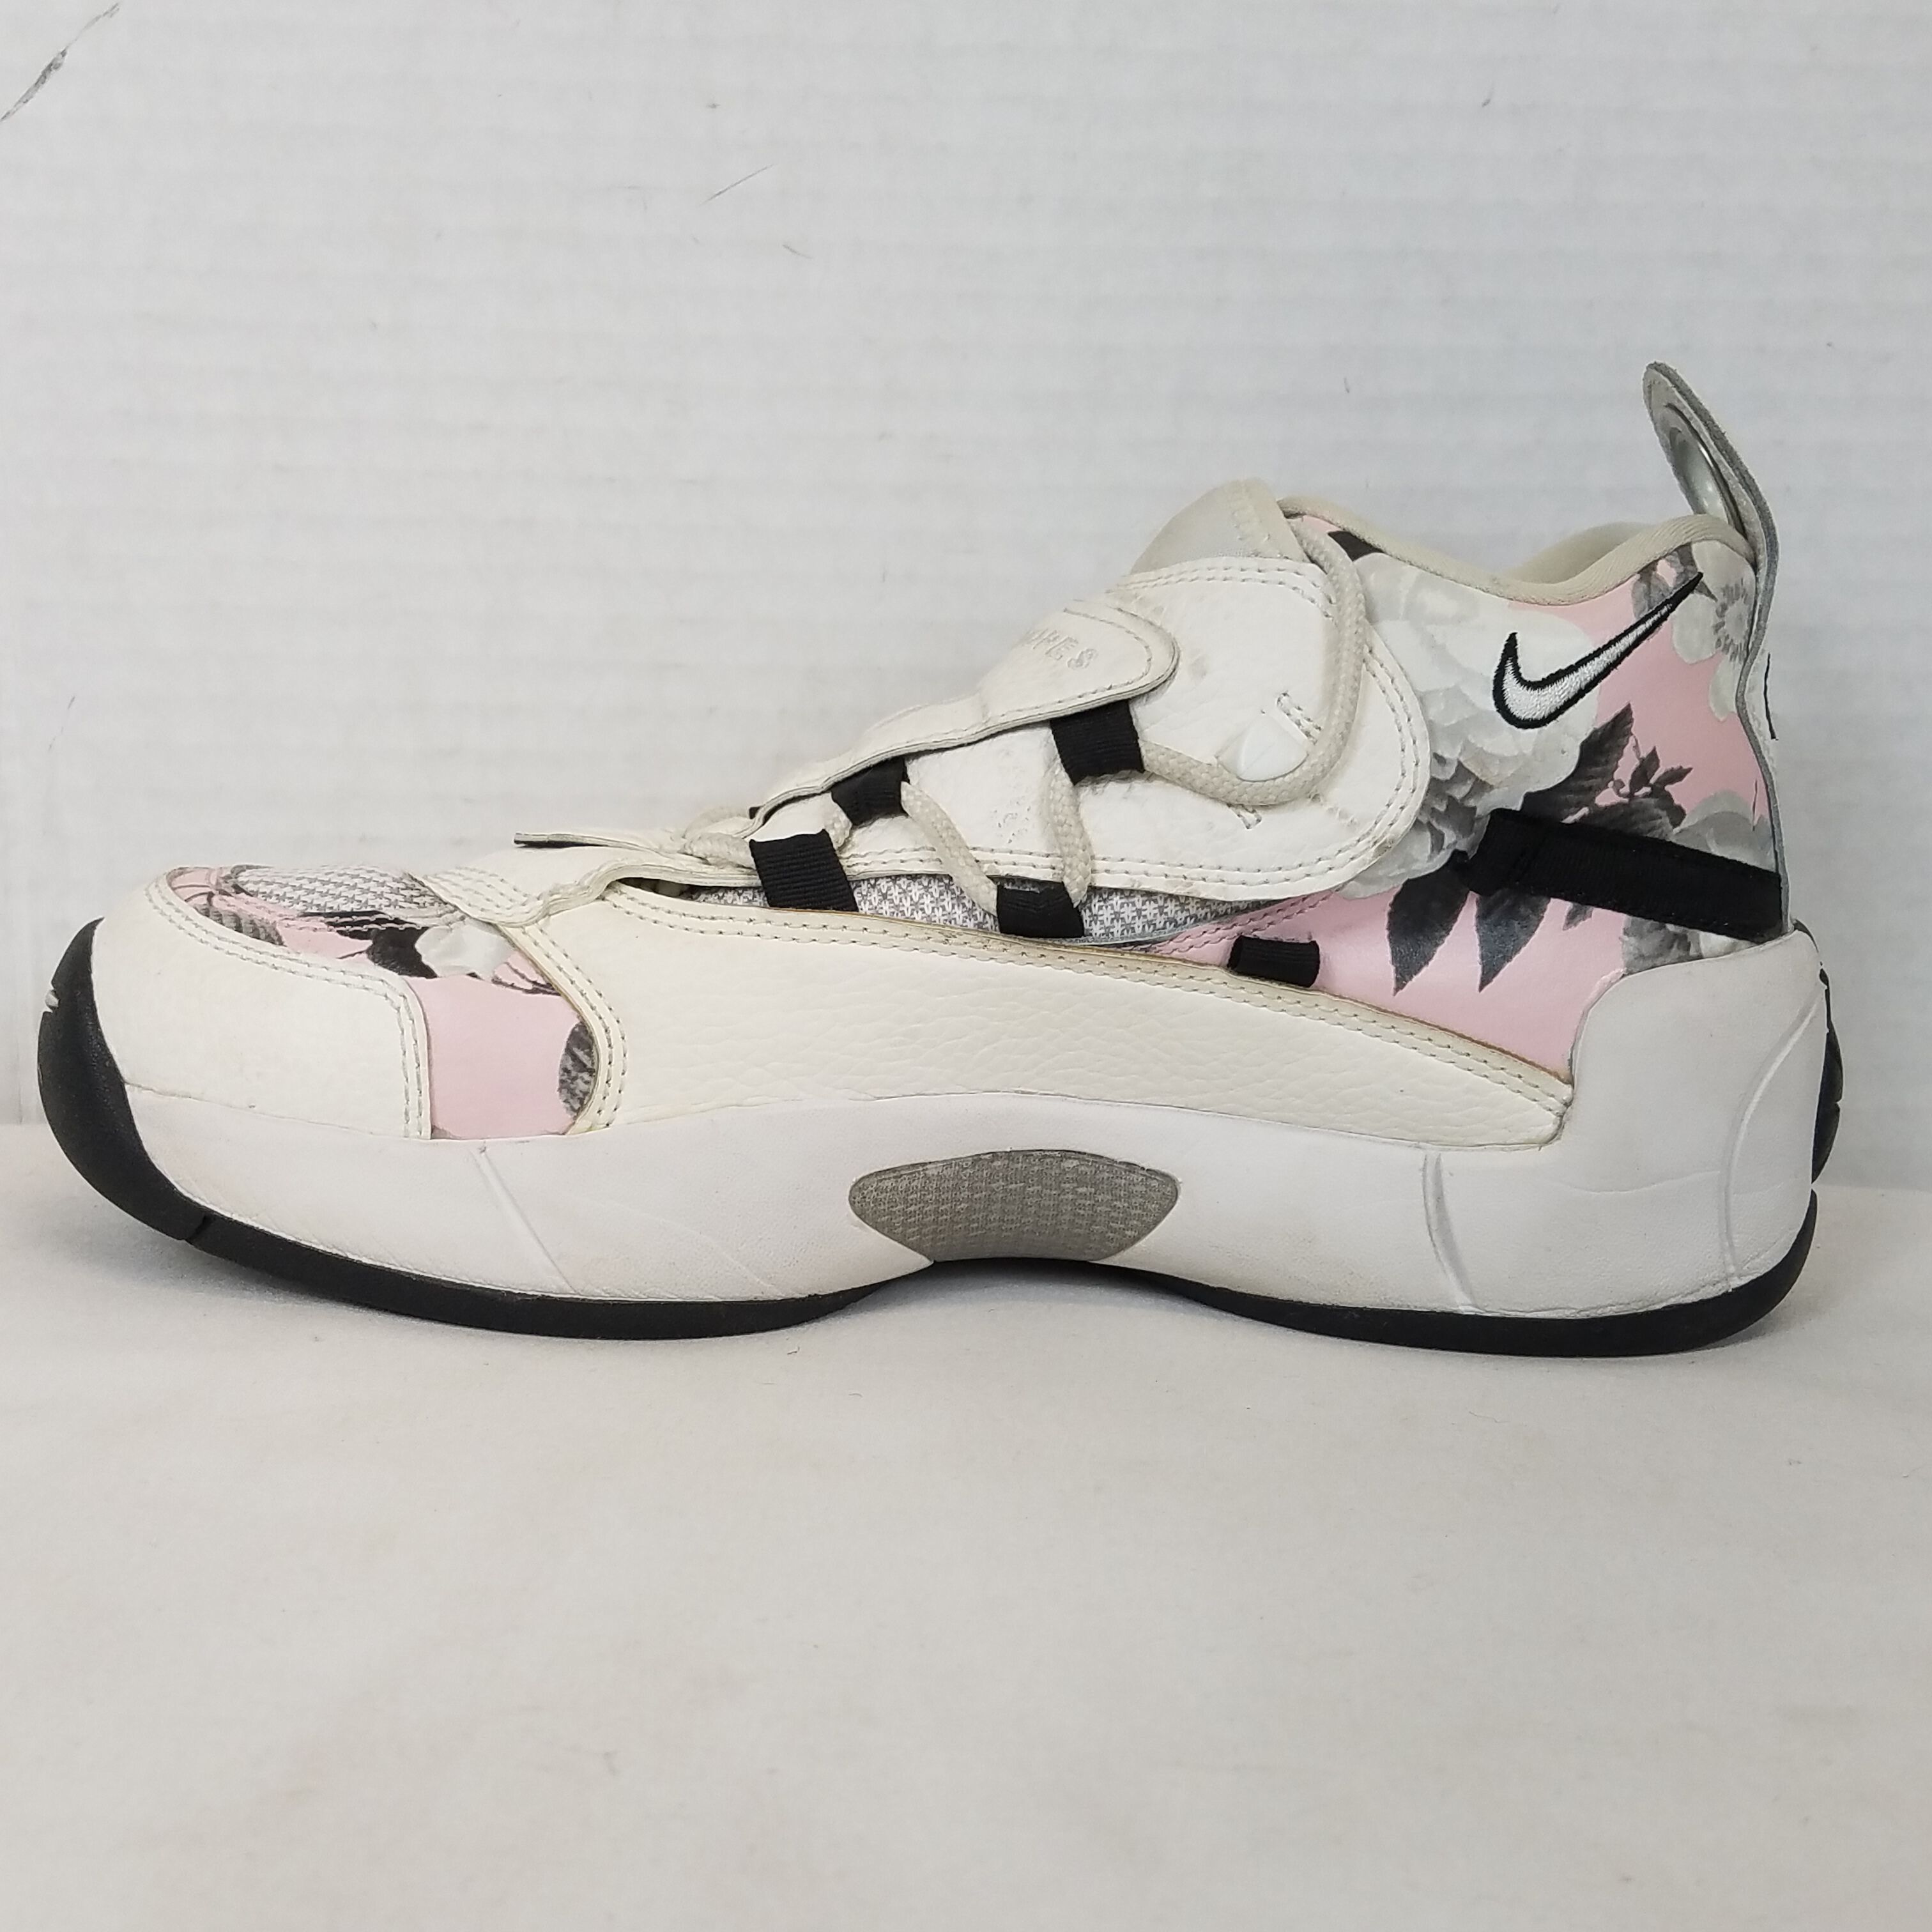 Nike Air Swoopes 2 White Floral 917592-103 Woman Shoe Size 10 Color White  Pink